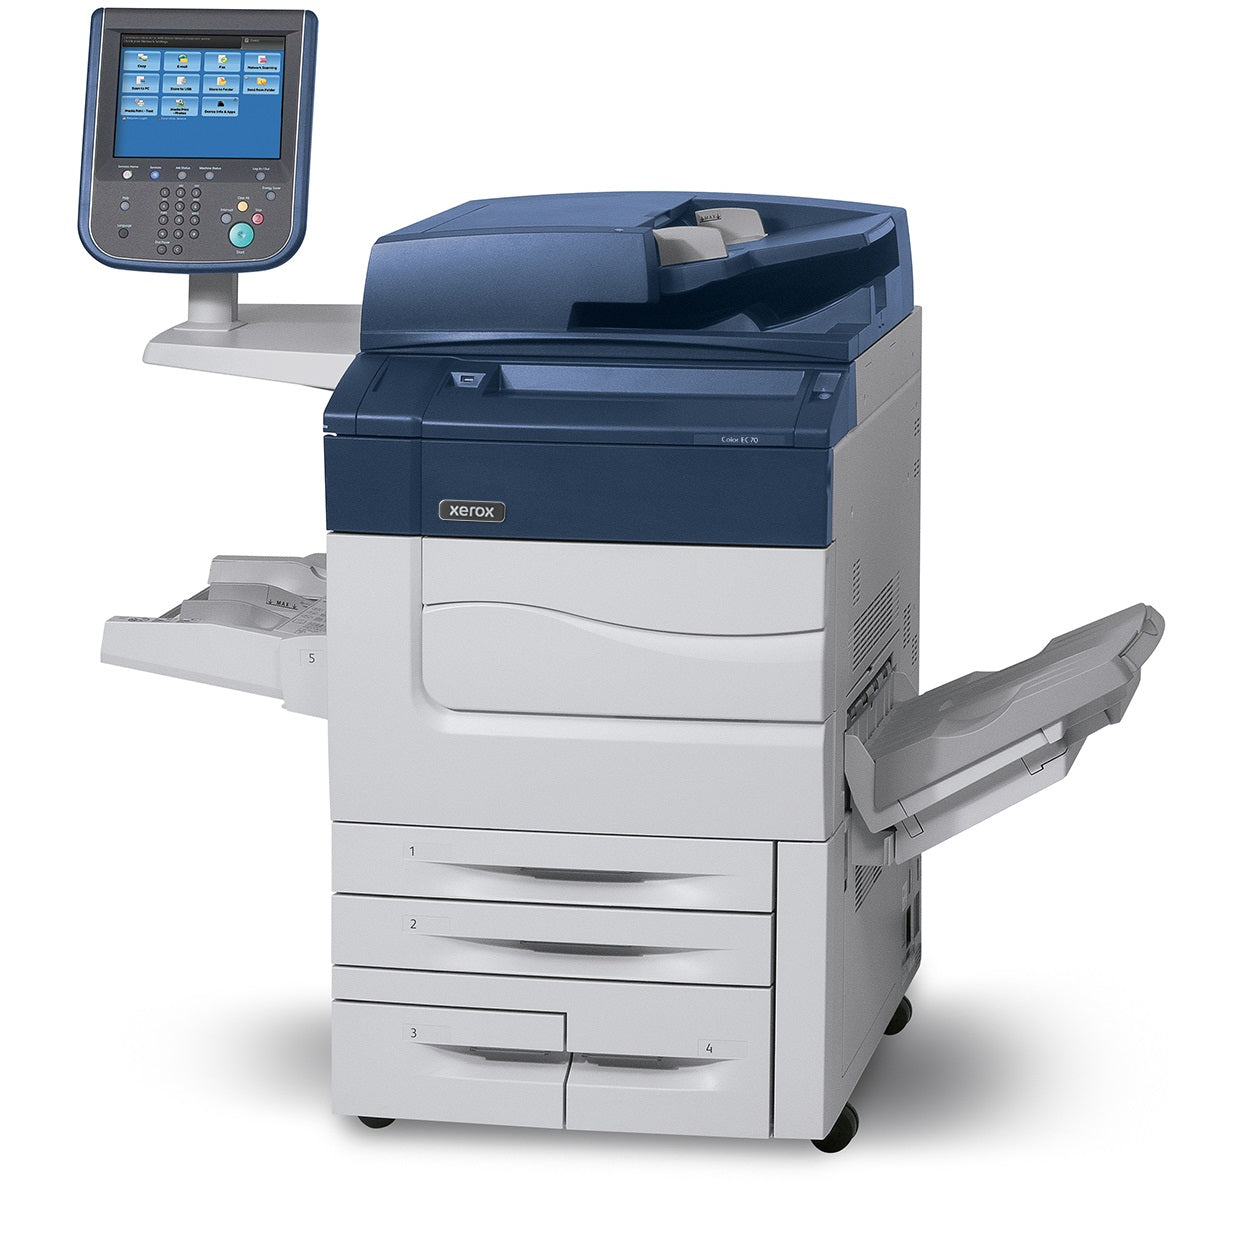 Absolute Toner $165/Month Xerox Color EC70 Professional Multifunction Color Printer Copier Scanner With Fax, Finishing, Feeding, Workflow (Optional Capabilities) And Duplex Printing Showroom Color Copiers